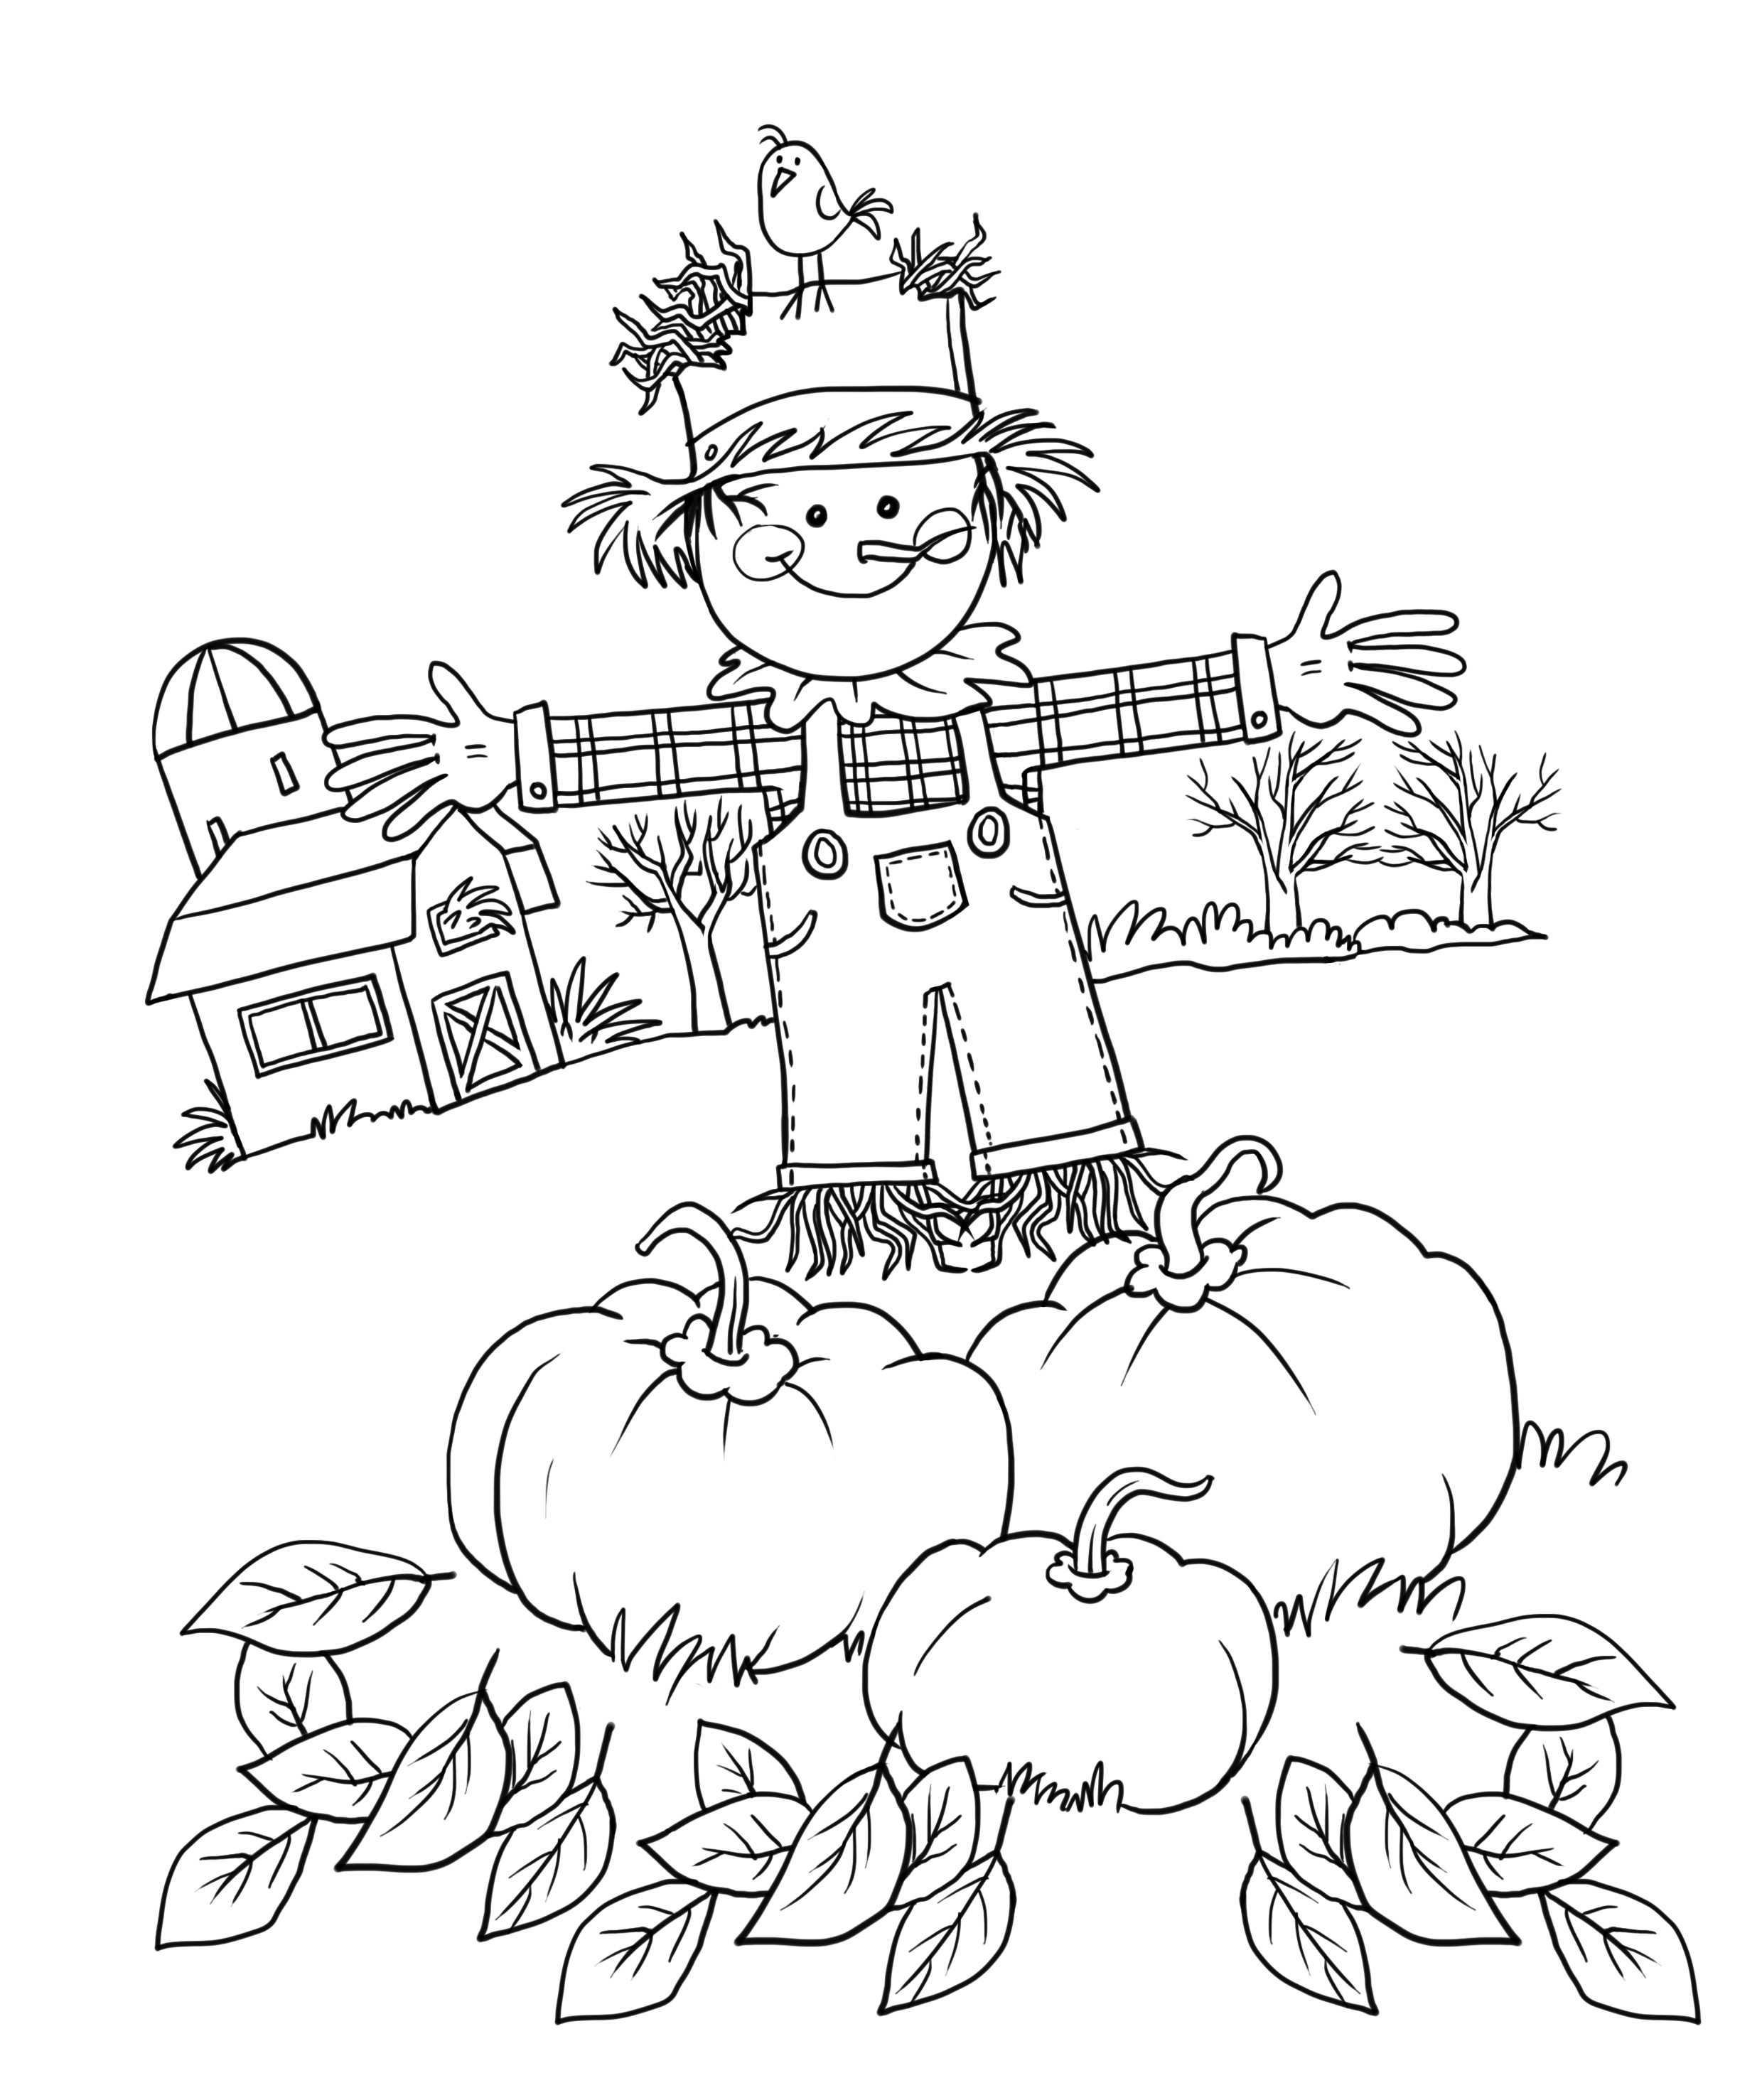 Fun Coloring Pages For Boys Fall
 Fall Coloring Pages